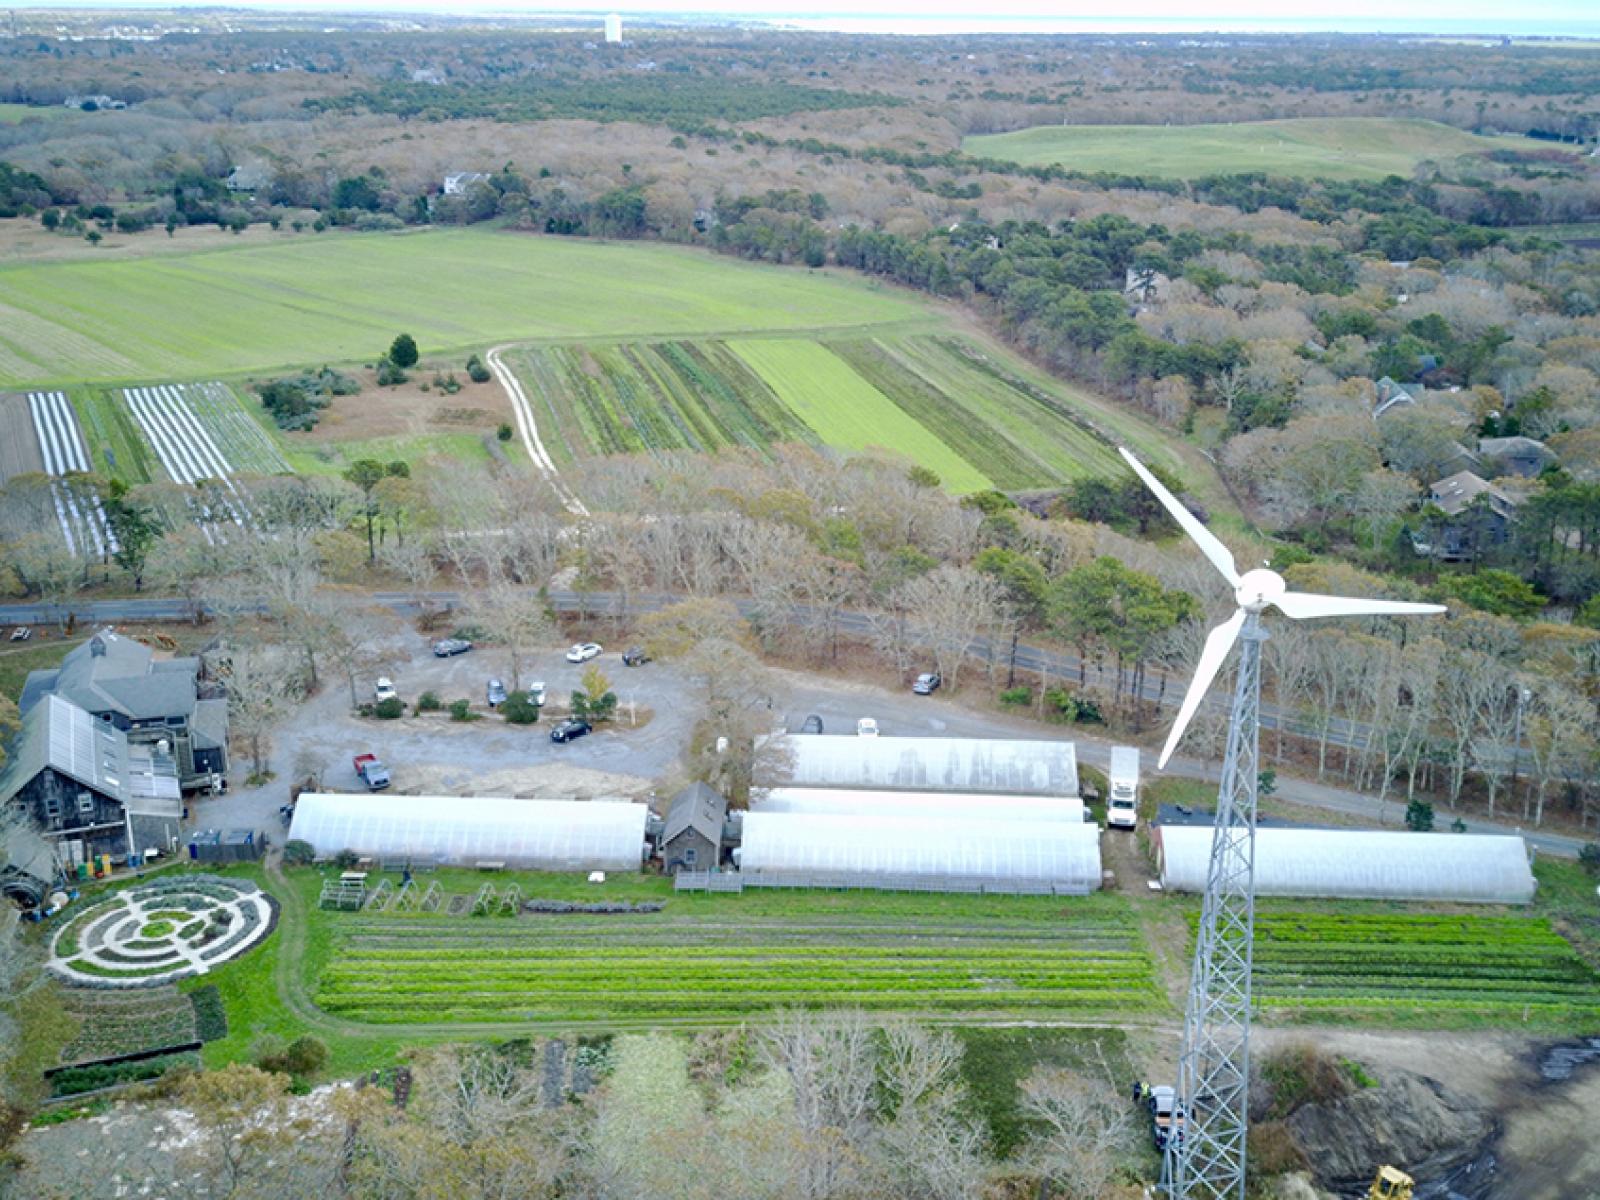 An aerial view of a small wind turbine with farmland in the background.